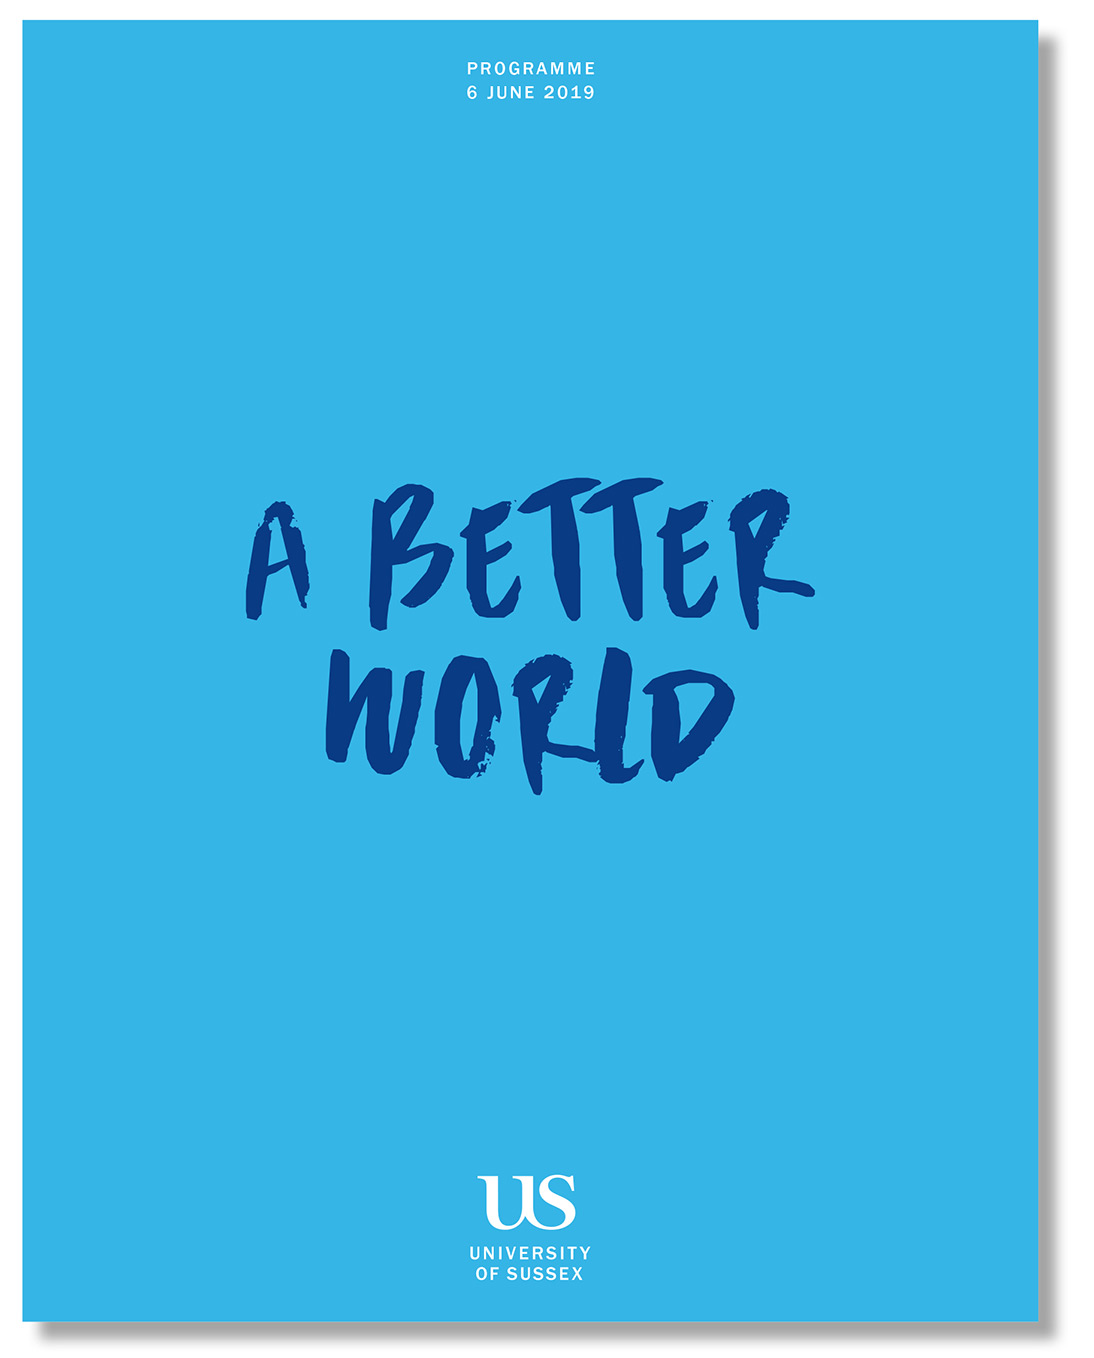 The University of Sussex - A Better World booklet designed by Irish Butcher